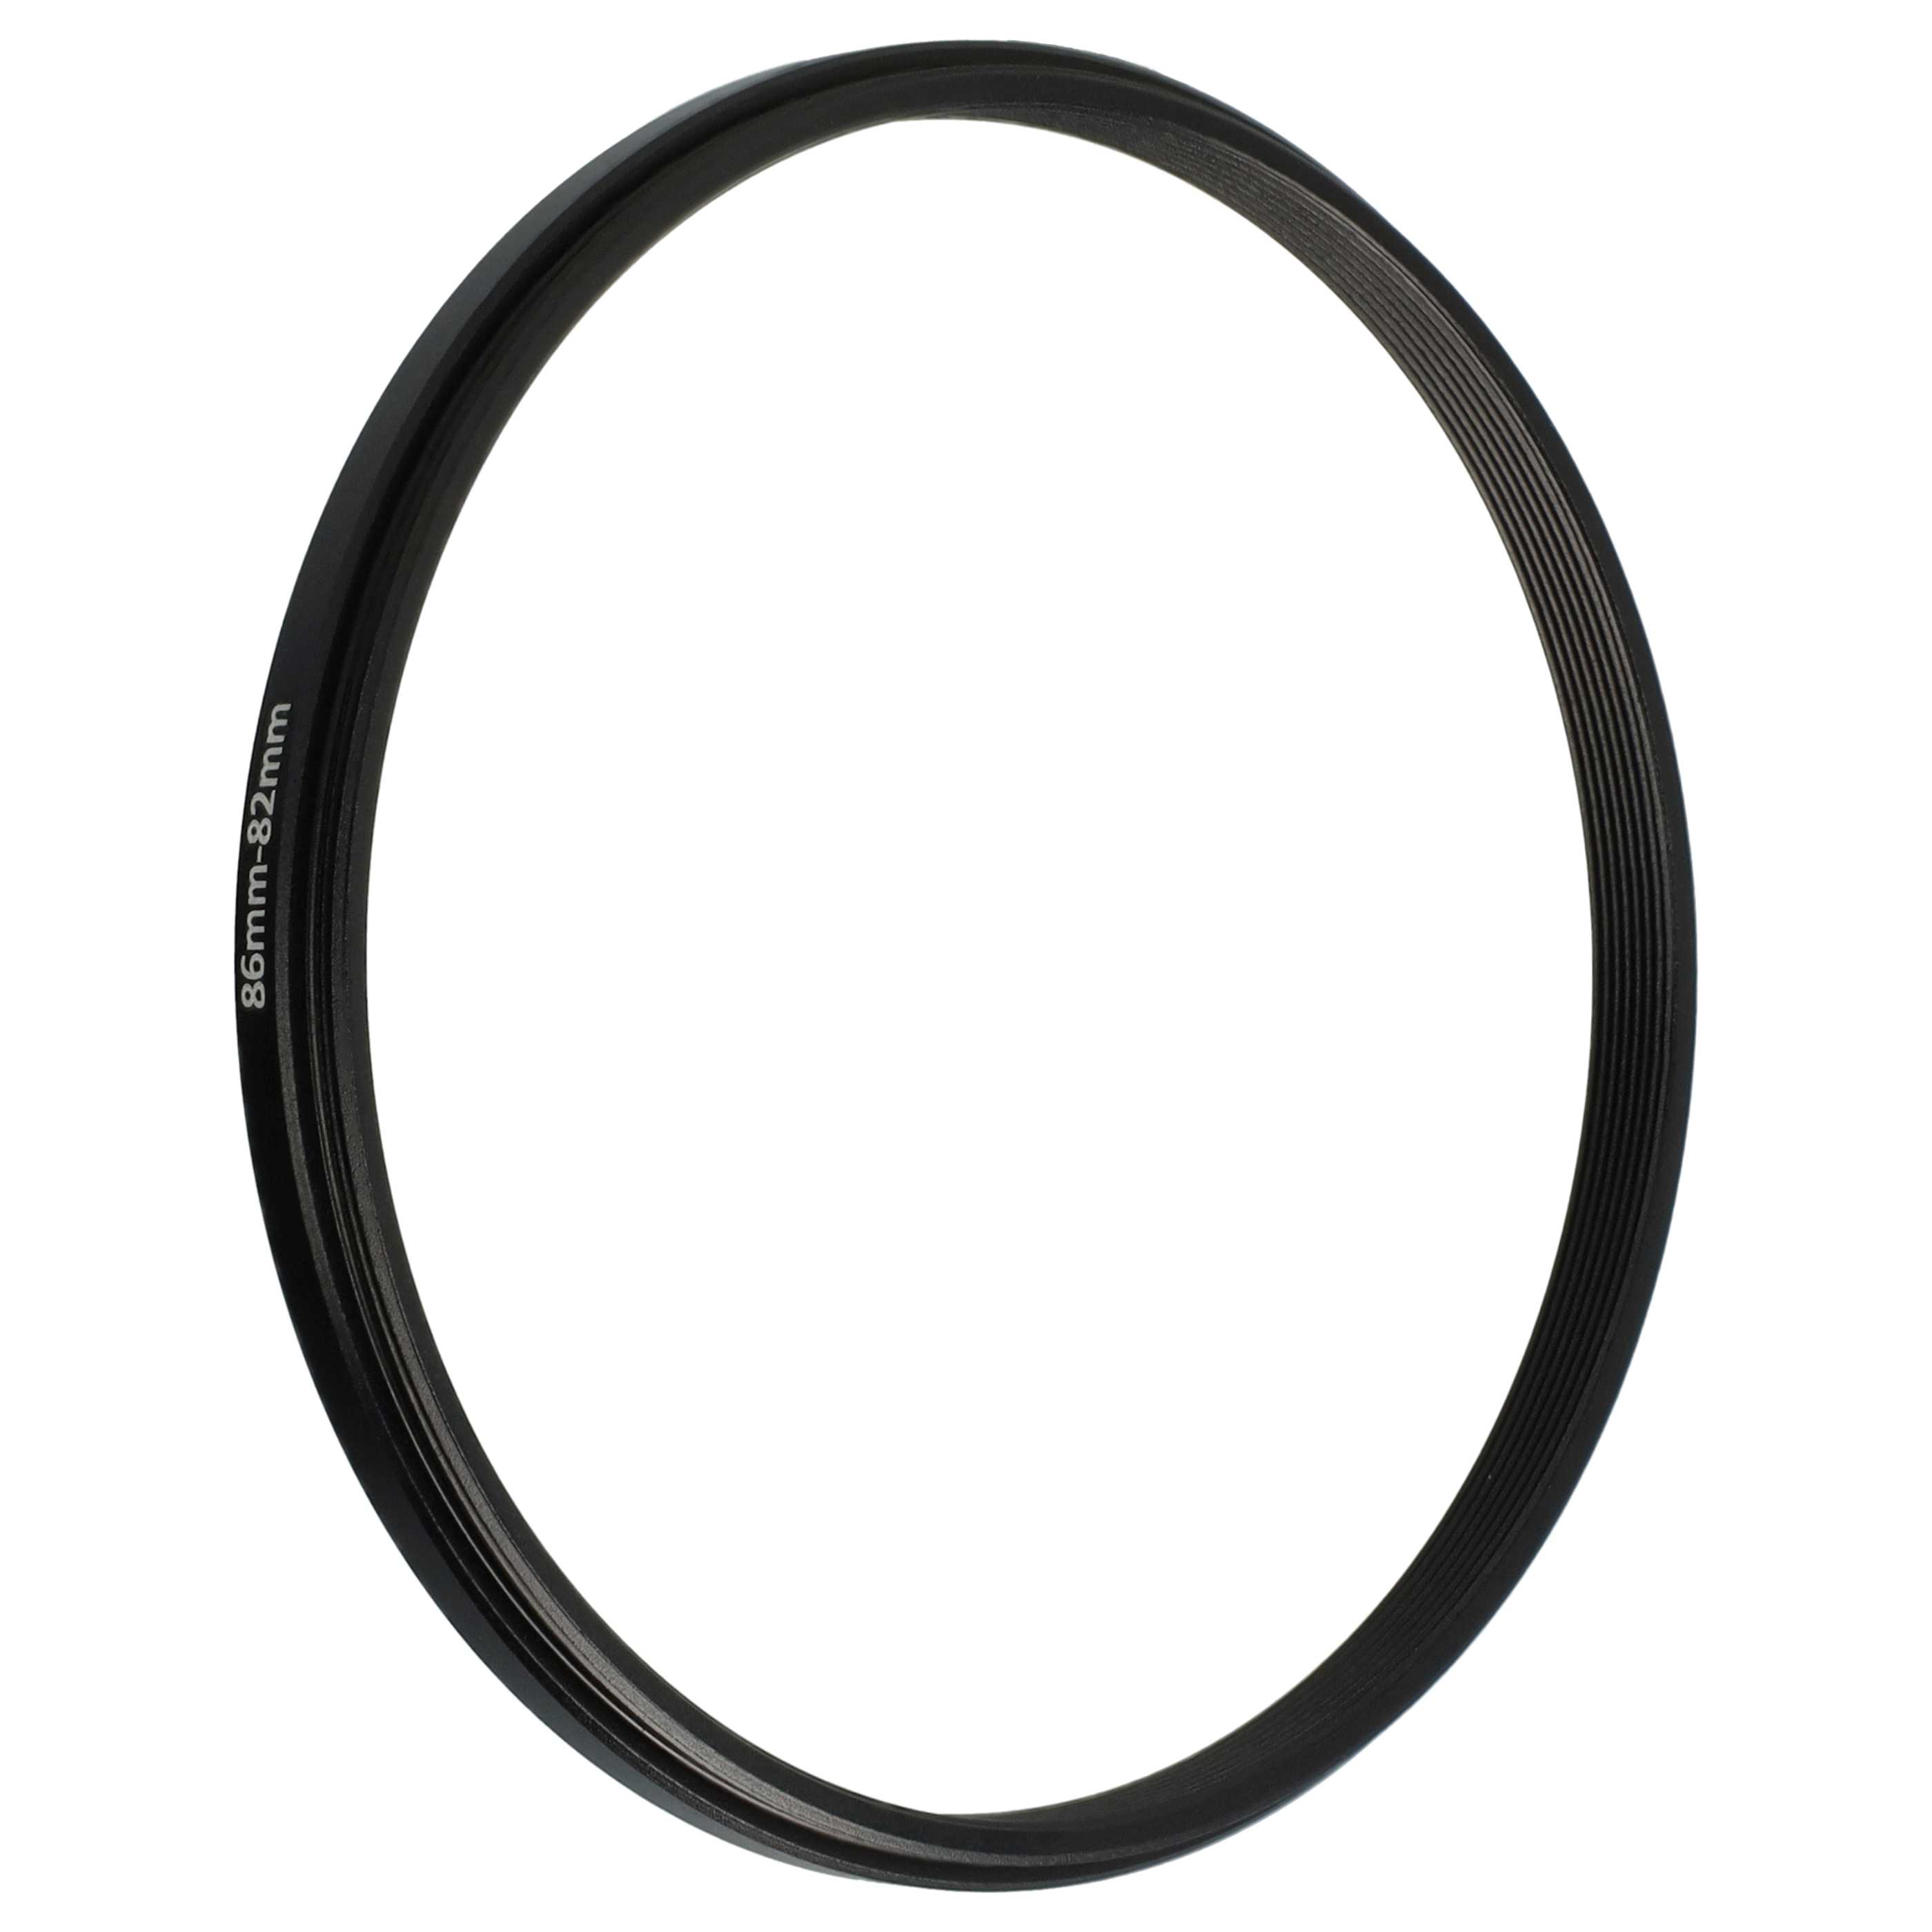 Step-Down Ring Adapter from 86 mm to 82 mm suitable for Camera Lens - Filter Adapter, metal